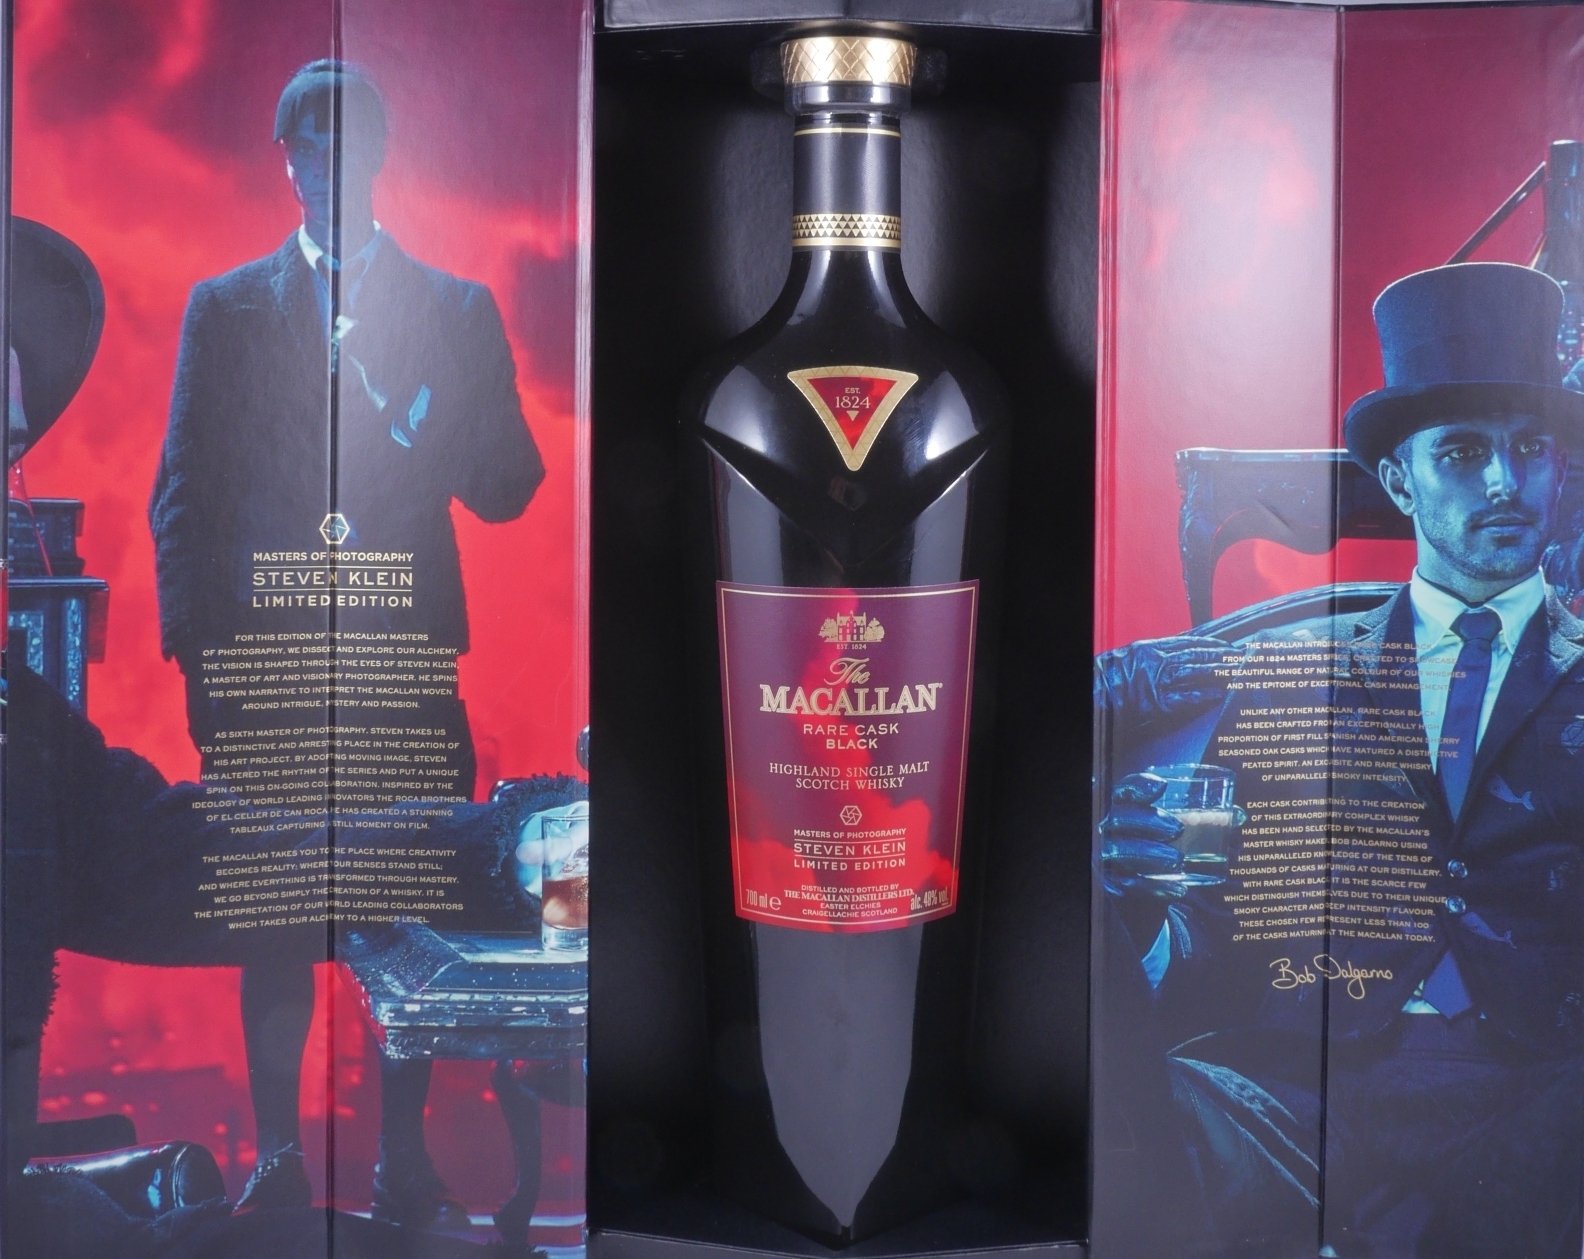 Buy Macallan Rare Cask Black Steven Klein Masters Of Photography Limited Edition Highland Single Malt Scotch Whisky 48 0 Abv At Amcom Secure Online